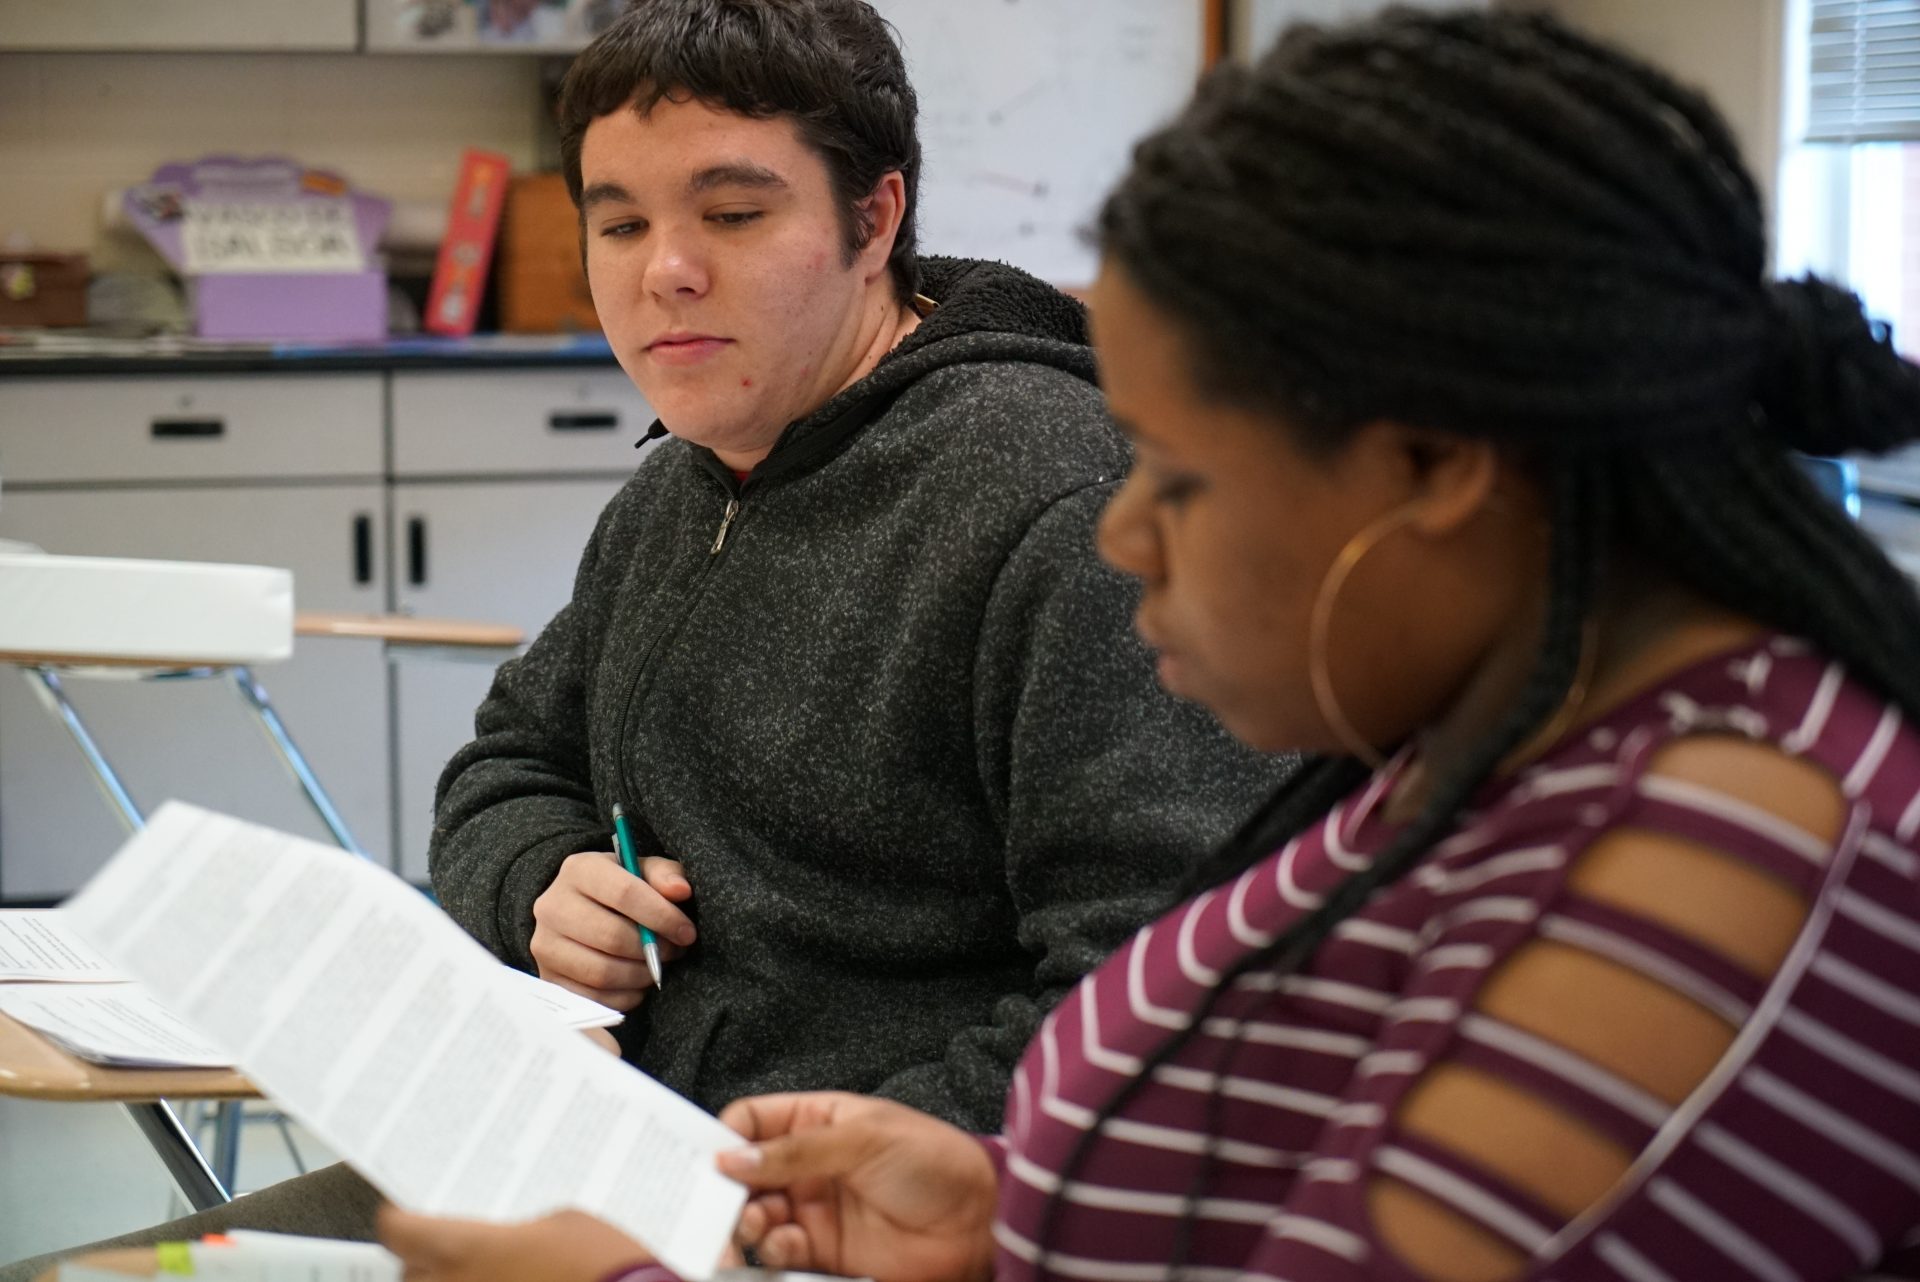 Joseph Tucker watches as Makizah Cotton makes an argument in civics class at Chatham Central High School in Bear Creek, N.C., on Tuesday, Nov. 5, 2019. The 10th-graders were debating whether President Trump should be impeached.